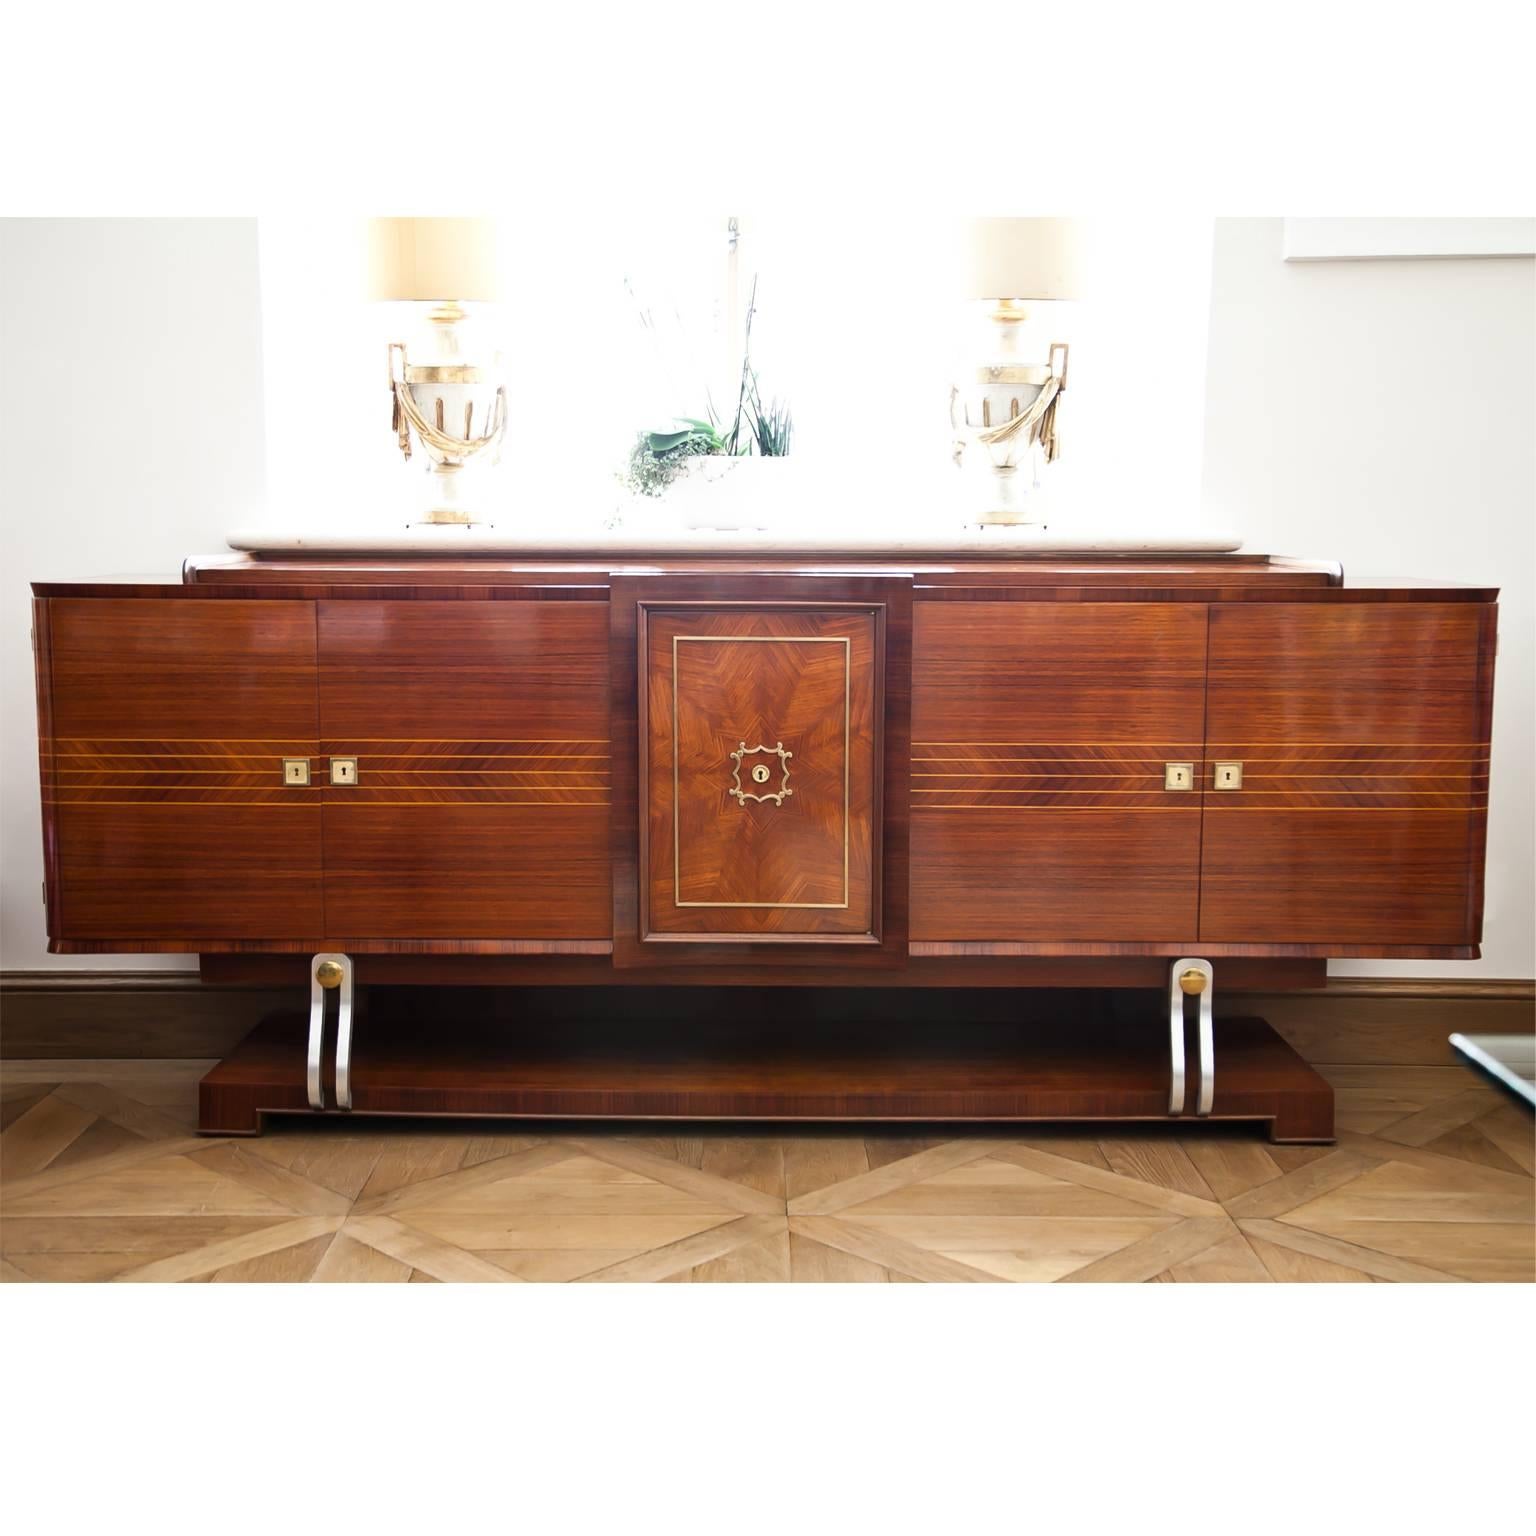 Long Art Deco sideboard on an unusual base, the tabletop is slightly raised. The front shows beautiful a star-shaped veneer pattern and thread inlays. Behind the central door is a small bar cabinet.